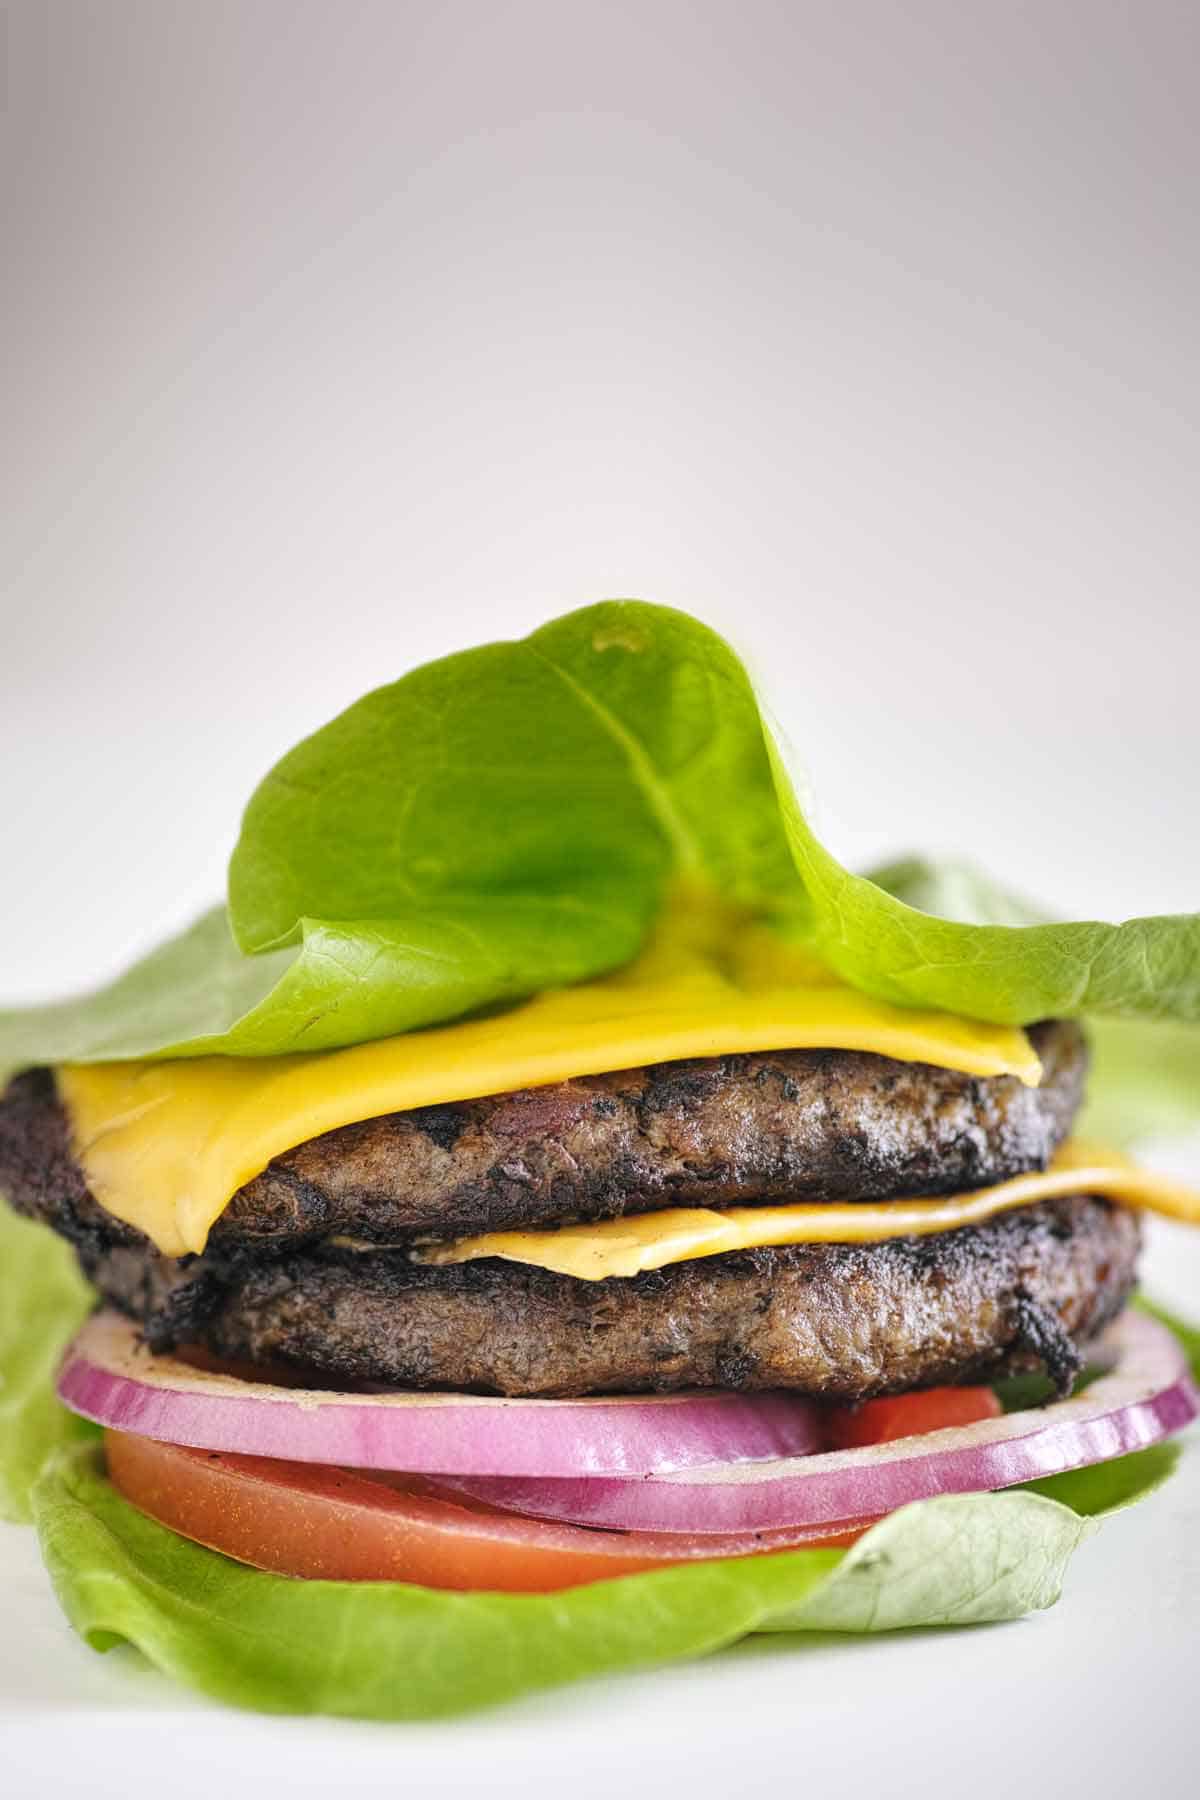 A 2-patty burger with tomato, cheese, and red onion served with a lettuce leaf bun.